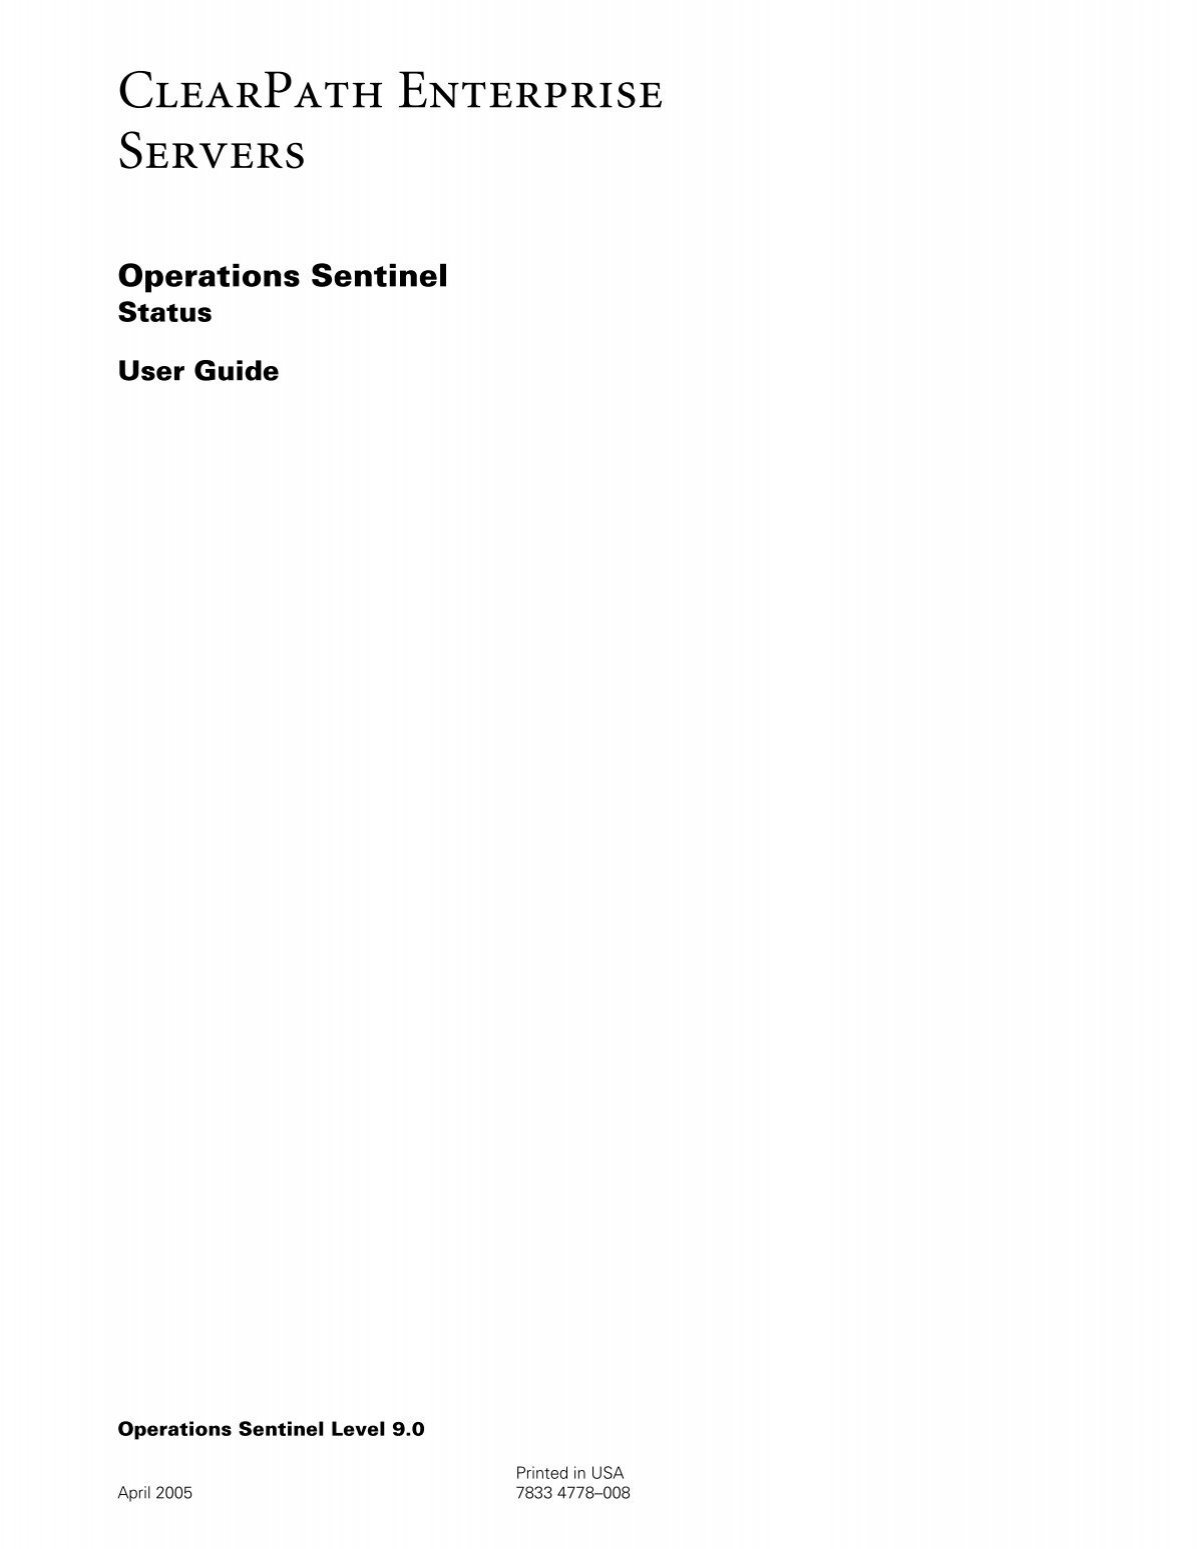 operations-sentinel-status-user-guide-public-support-login-unisys